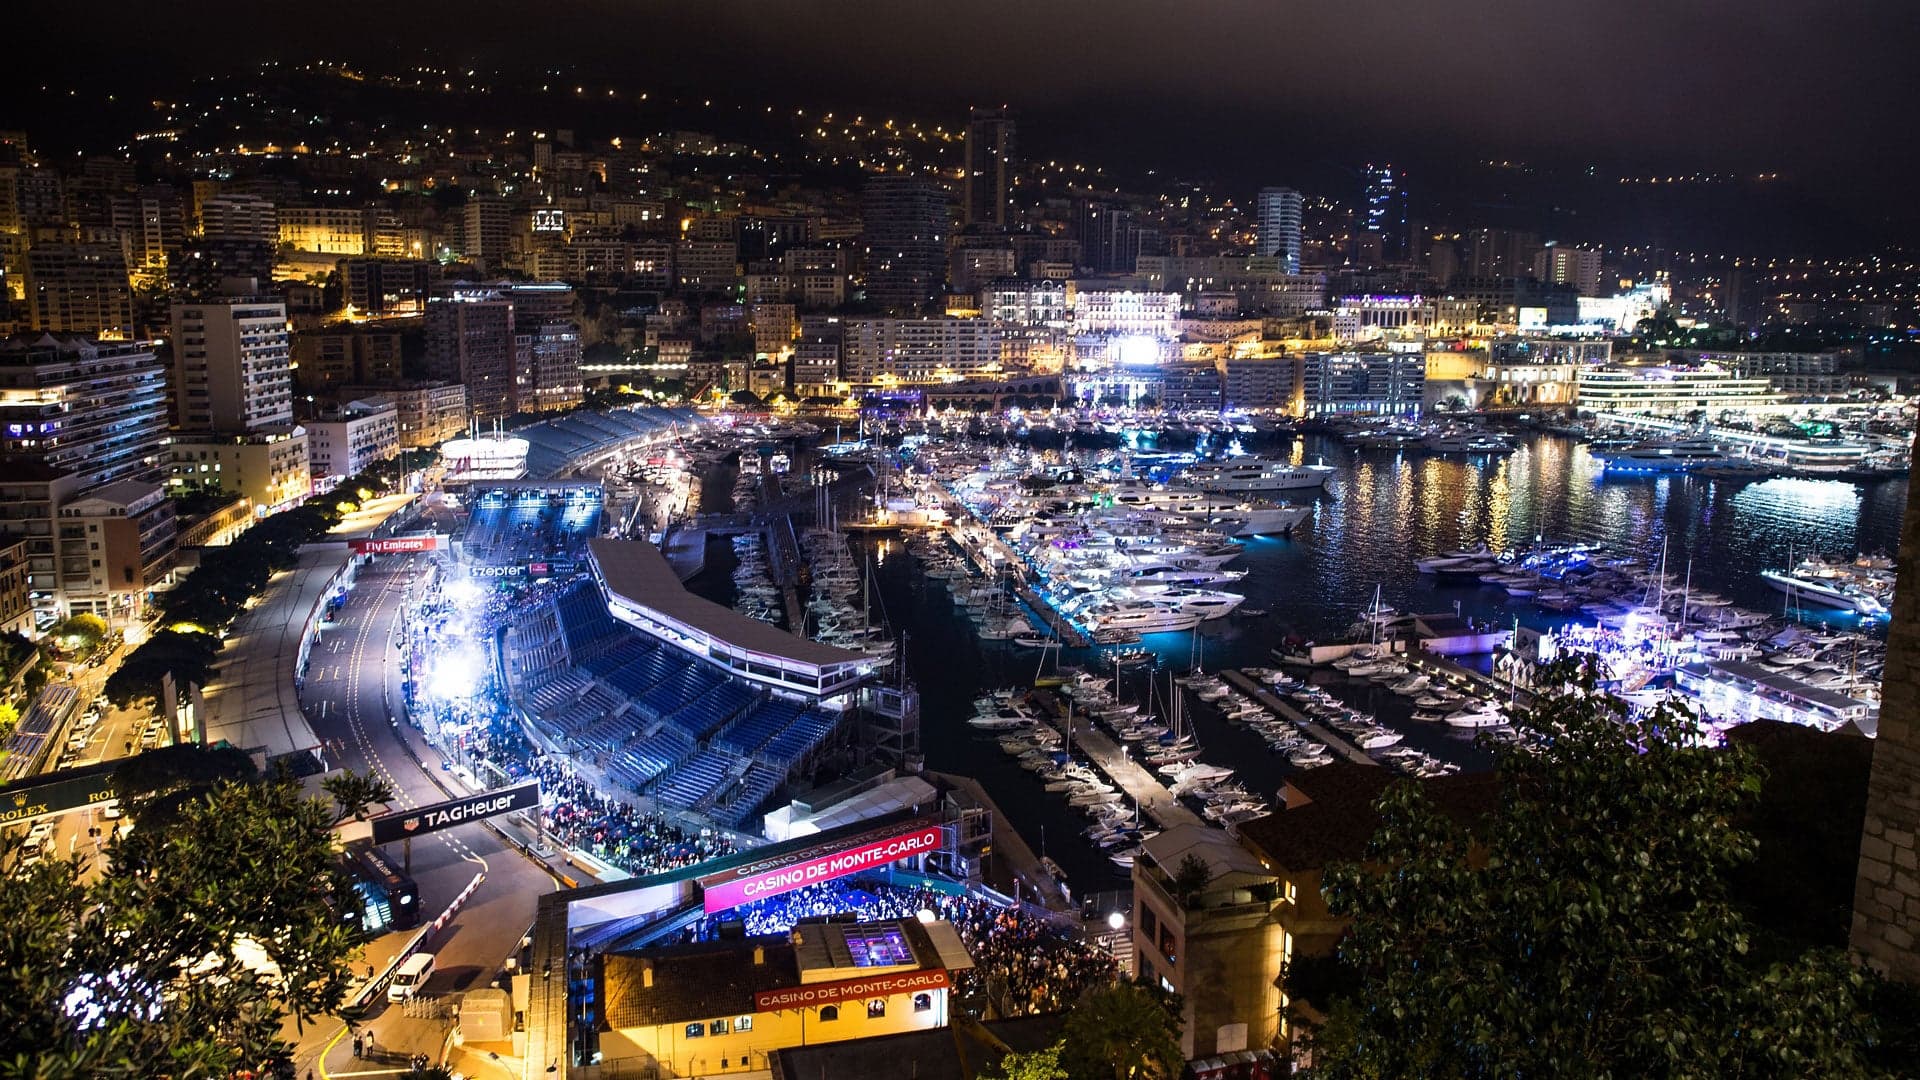 A Top Motorsports Photographer Takes Us Behind the Scenes of the Monaco F1 Race